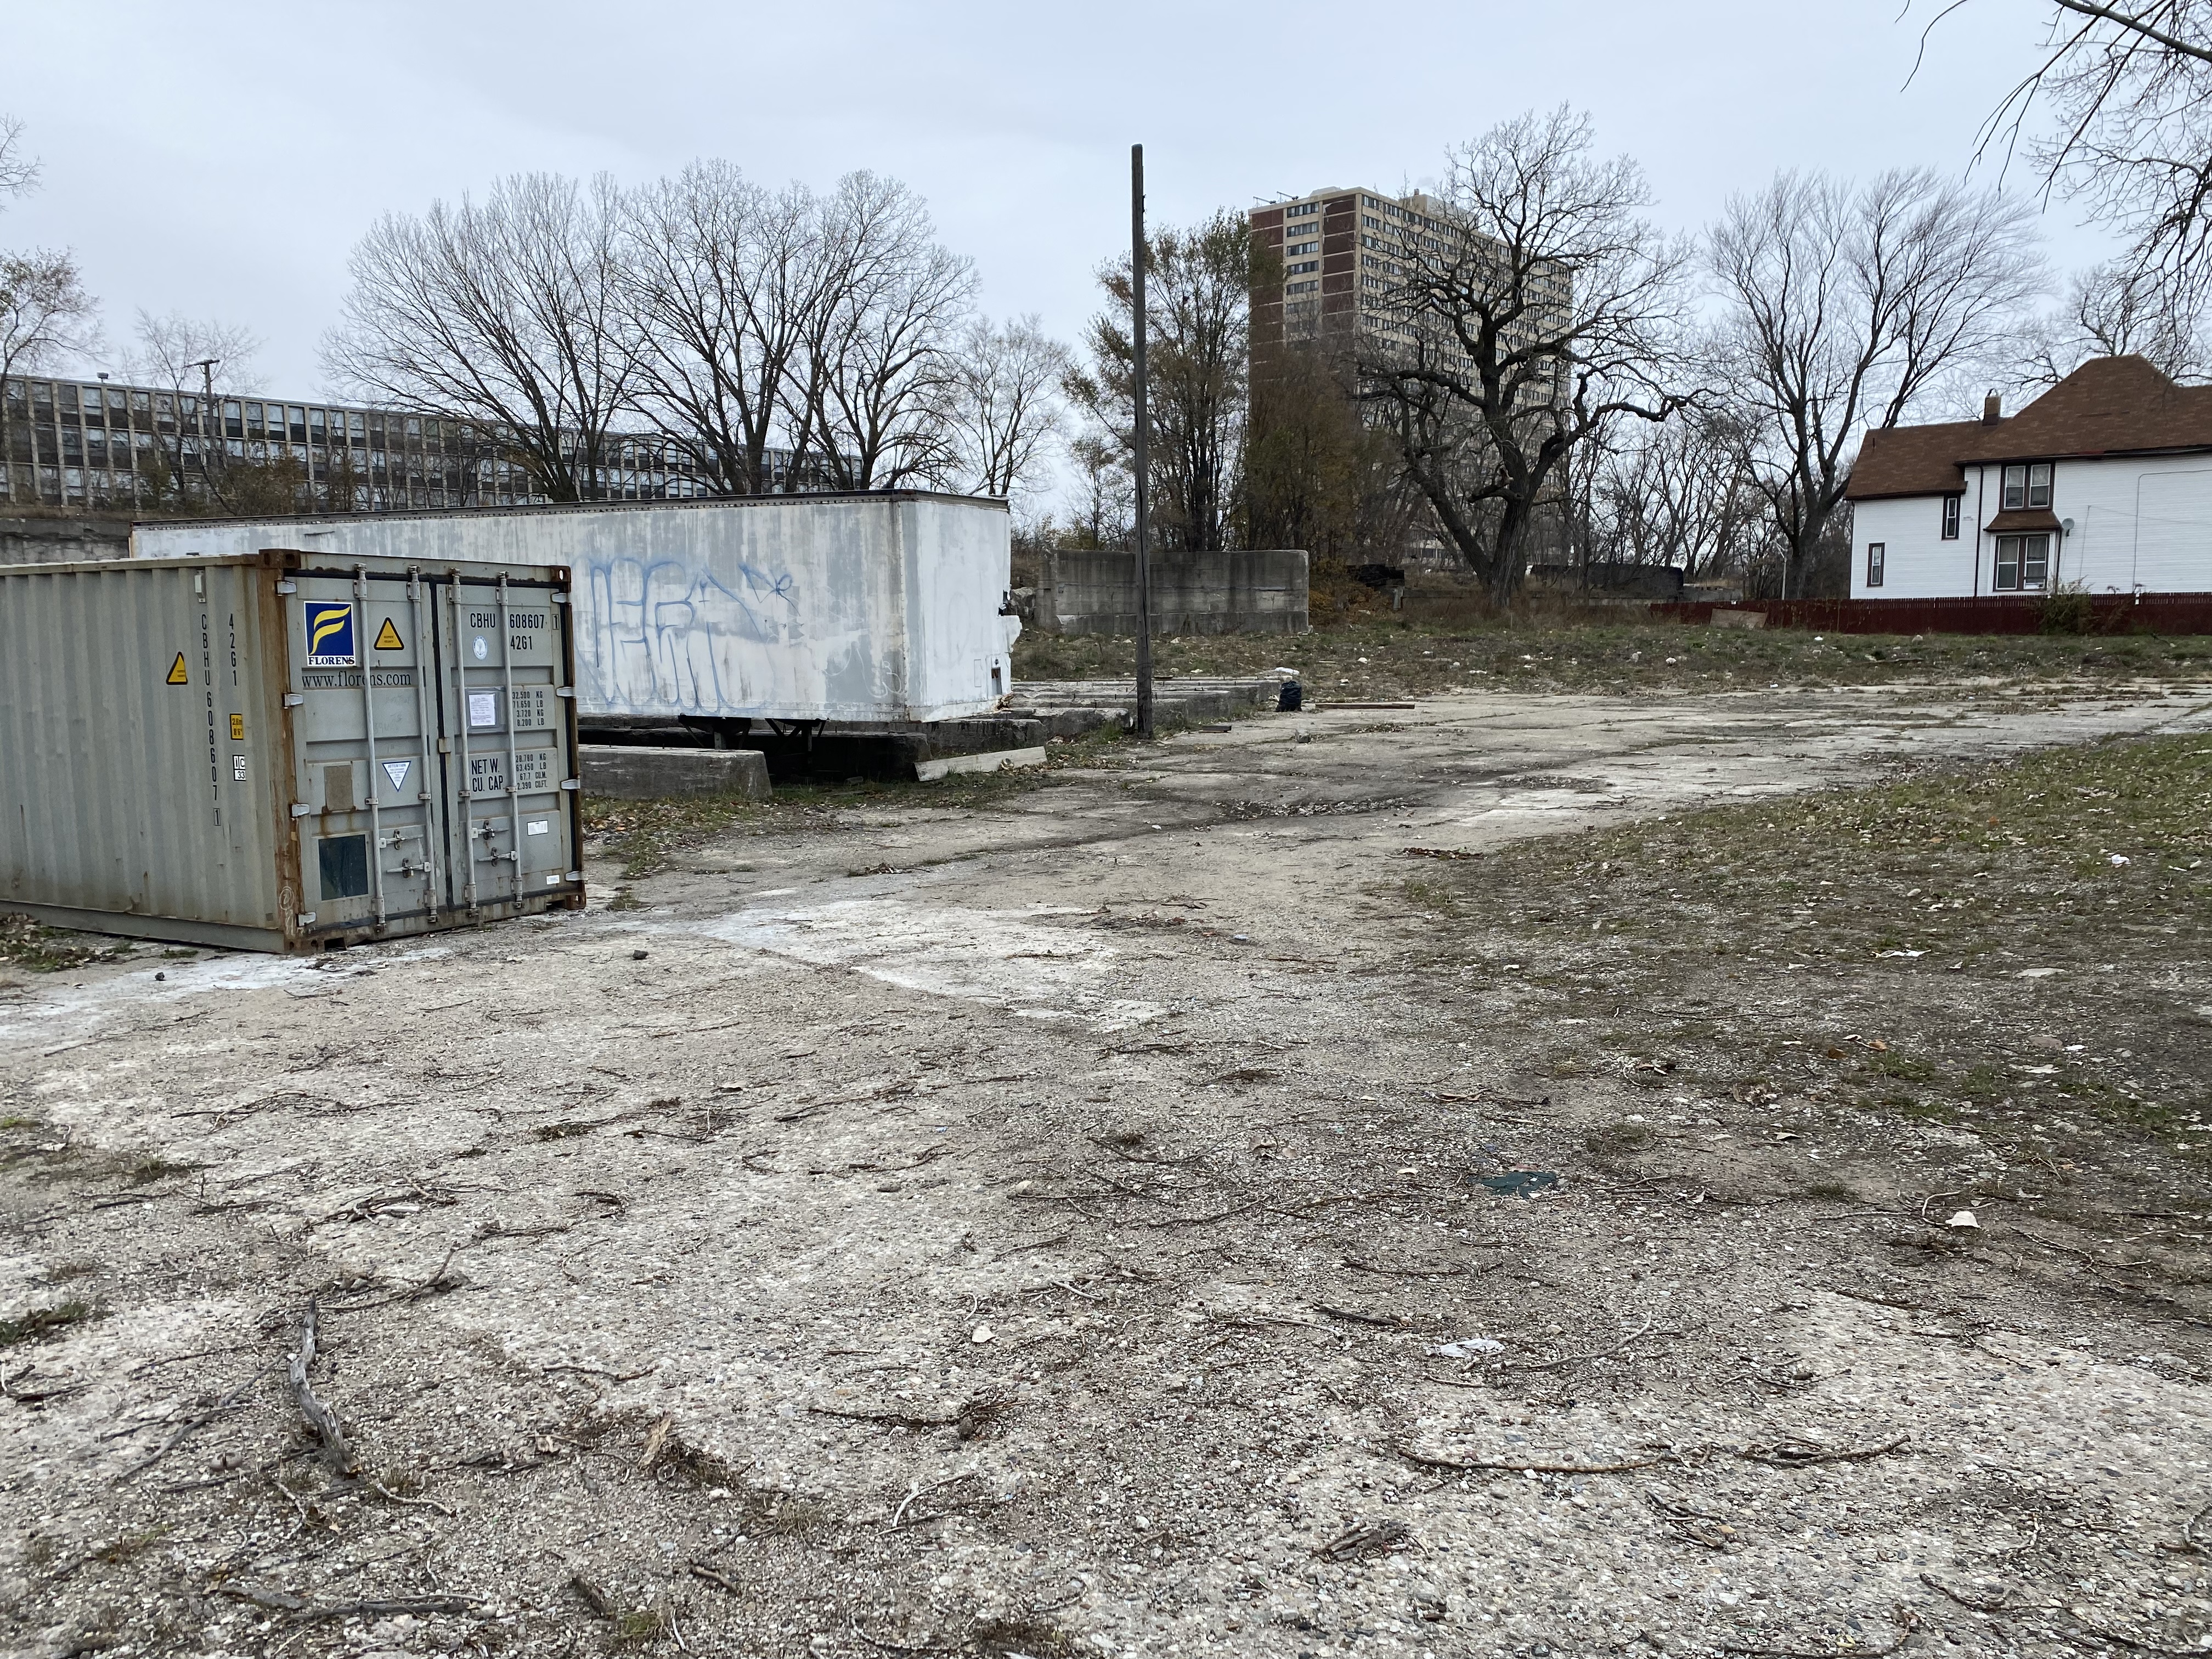 Where three train containers once stood in an empty Englewood lot now only stand two. The third, filled with an estimated $50,000 worth of toys, jewelry, clothes and other donations, was stolen sometime before 1 p.m. Saturday, Nov. 27, 2021.